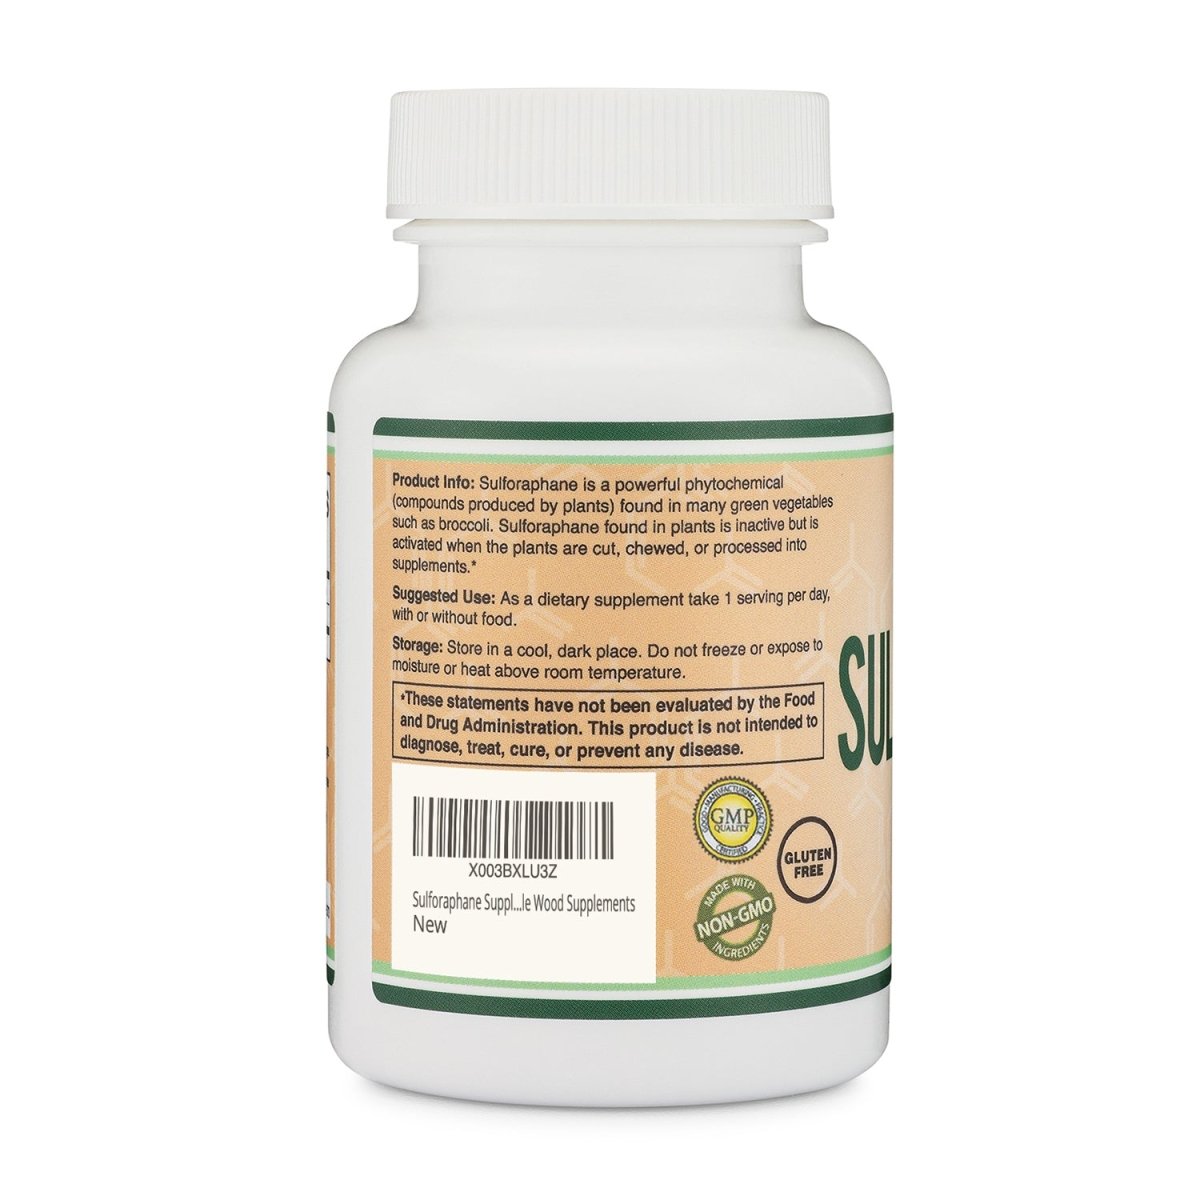 Sulforaphane Triple Pack - Double Wood Supplements